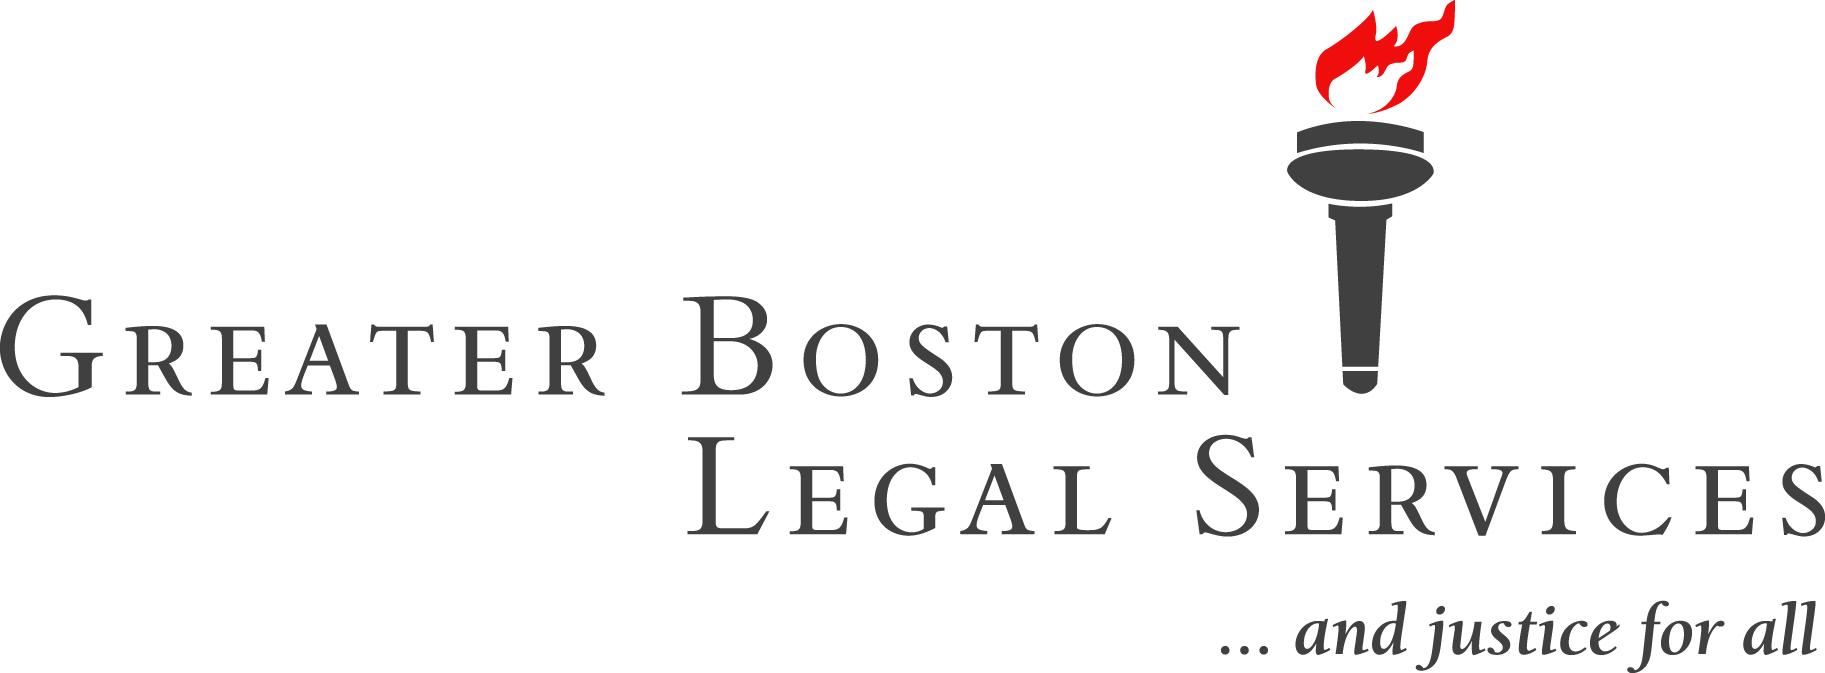 Greater Boston Legal Services logo